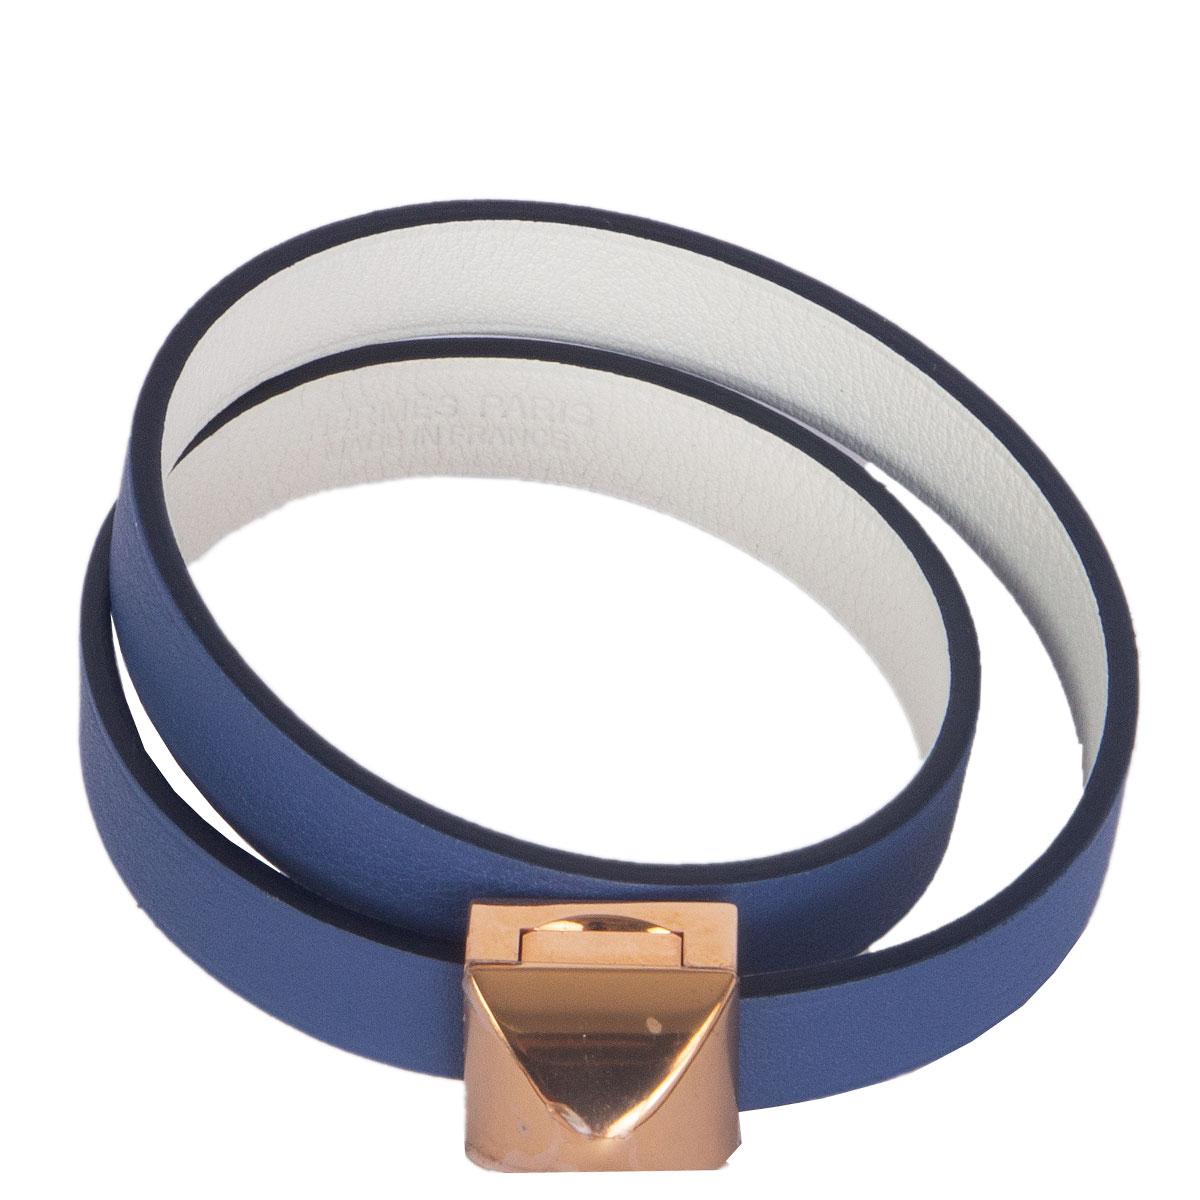 100% authentic Hermes 'Medor Infini Double Tour' in bleu brighton and blanc Swift calfskin featuring rose gold plated hardware. Brand new with protective plastic on hardware. Comes with box.

Measurements
Tag Size	T2
Width	0.9cm (0.4in)
Length	33cm